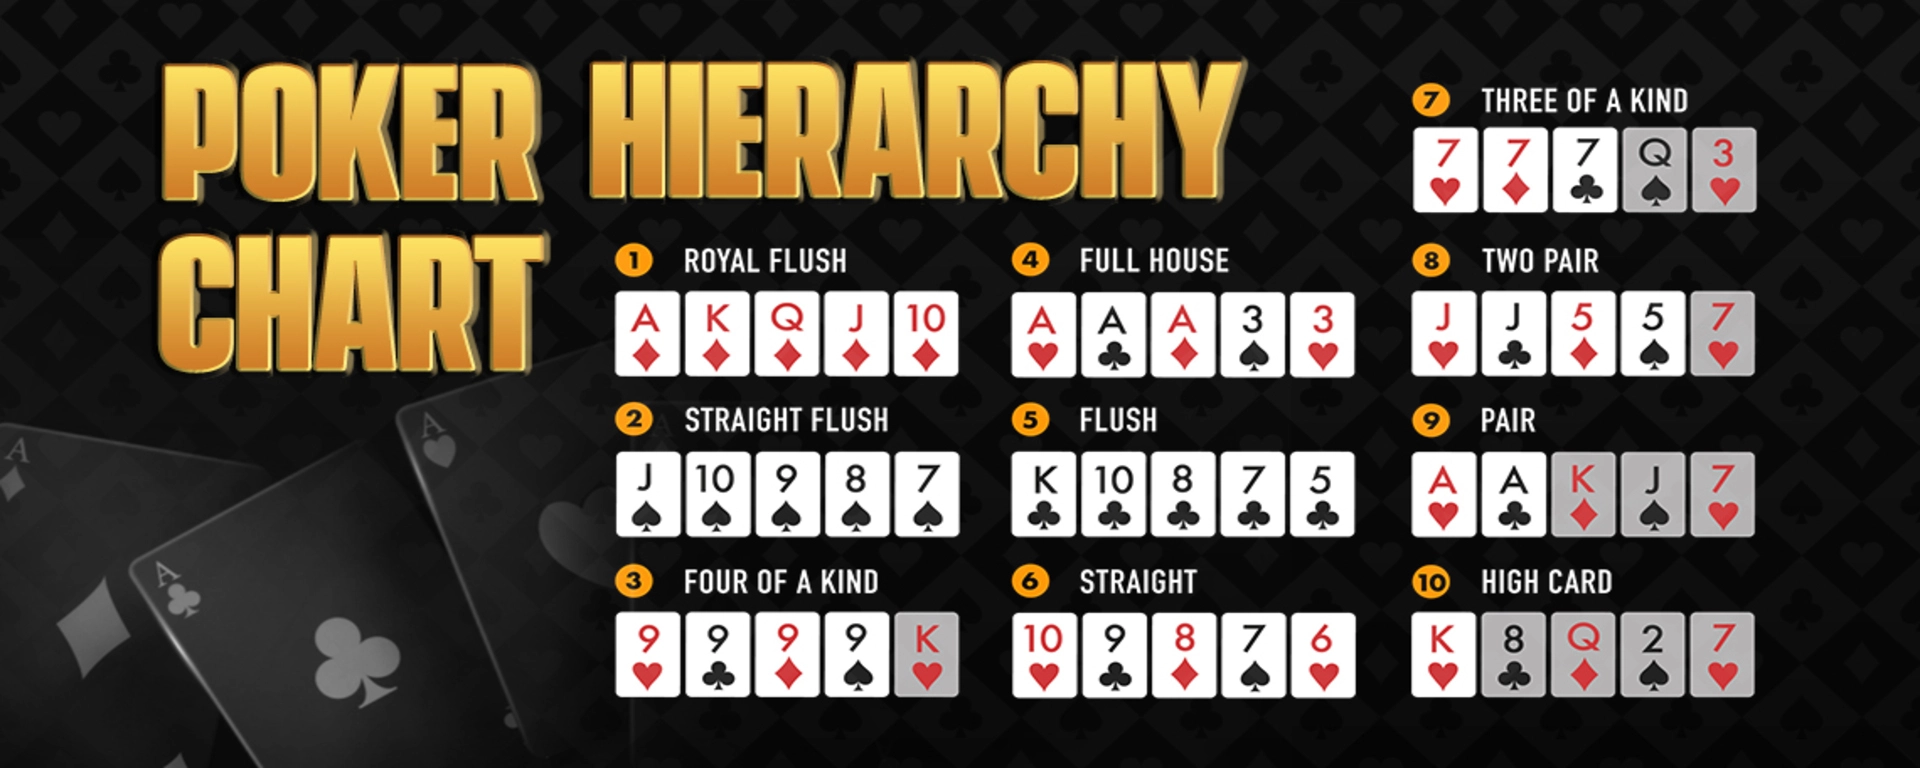 Poker Hierarchy Chart